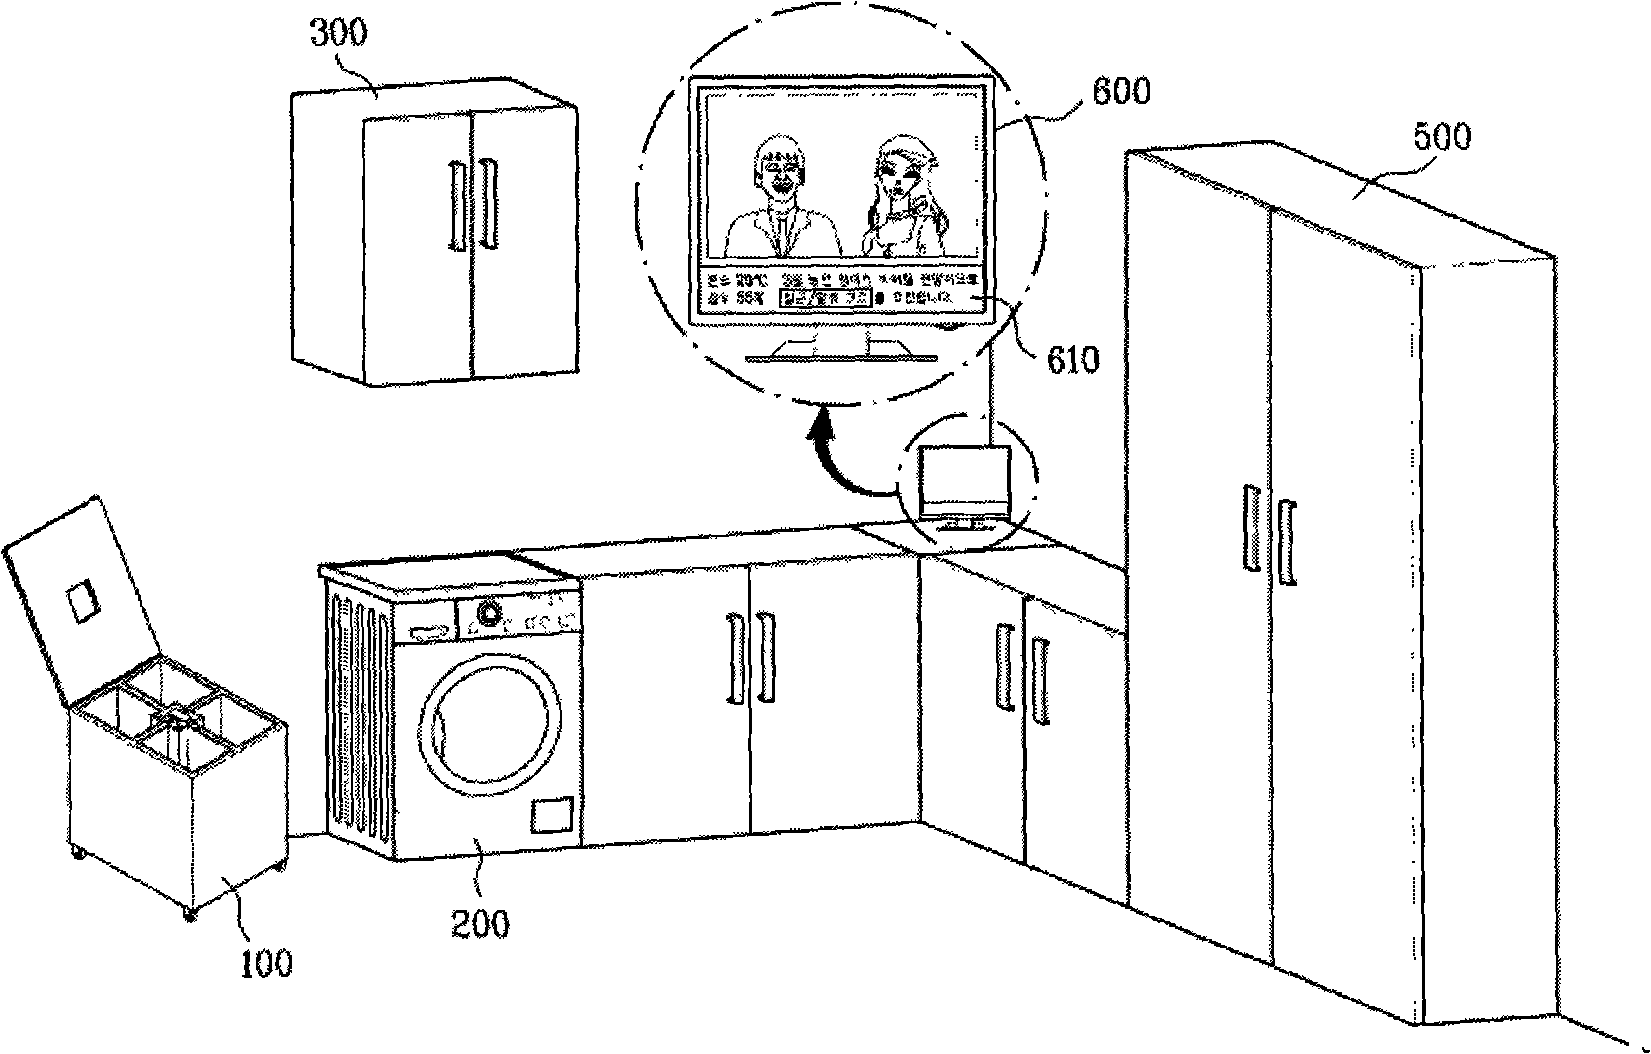 Composite clothing processing system